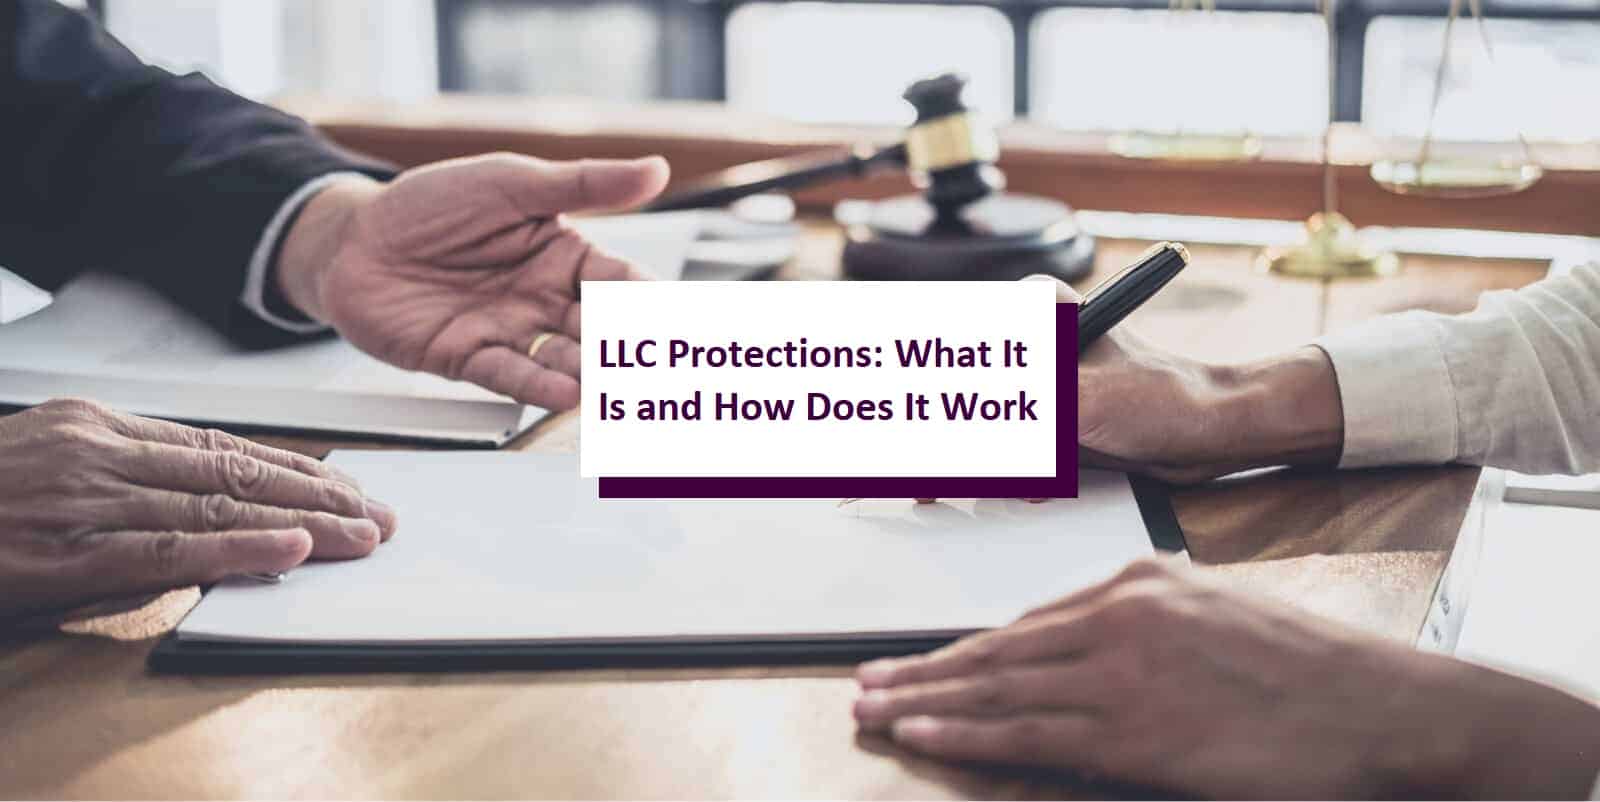 LLC Protections: What It Is and How Does It Work